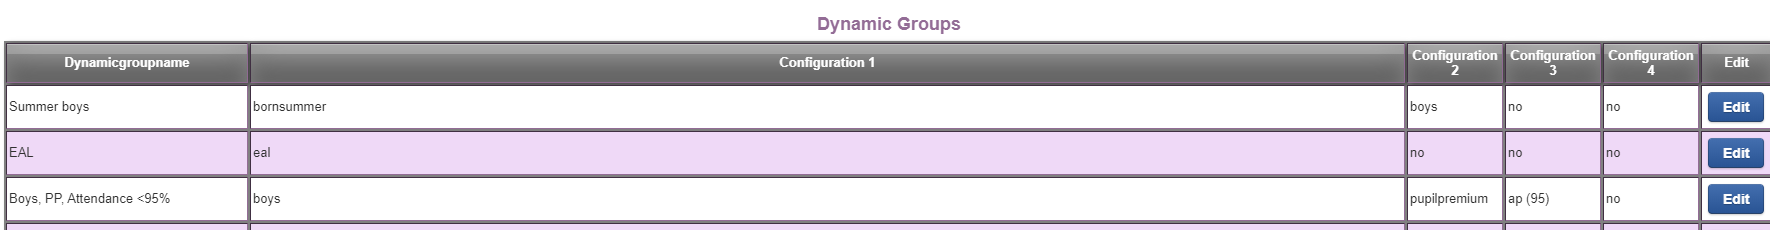 edit all dynamic groups.png